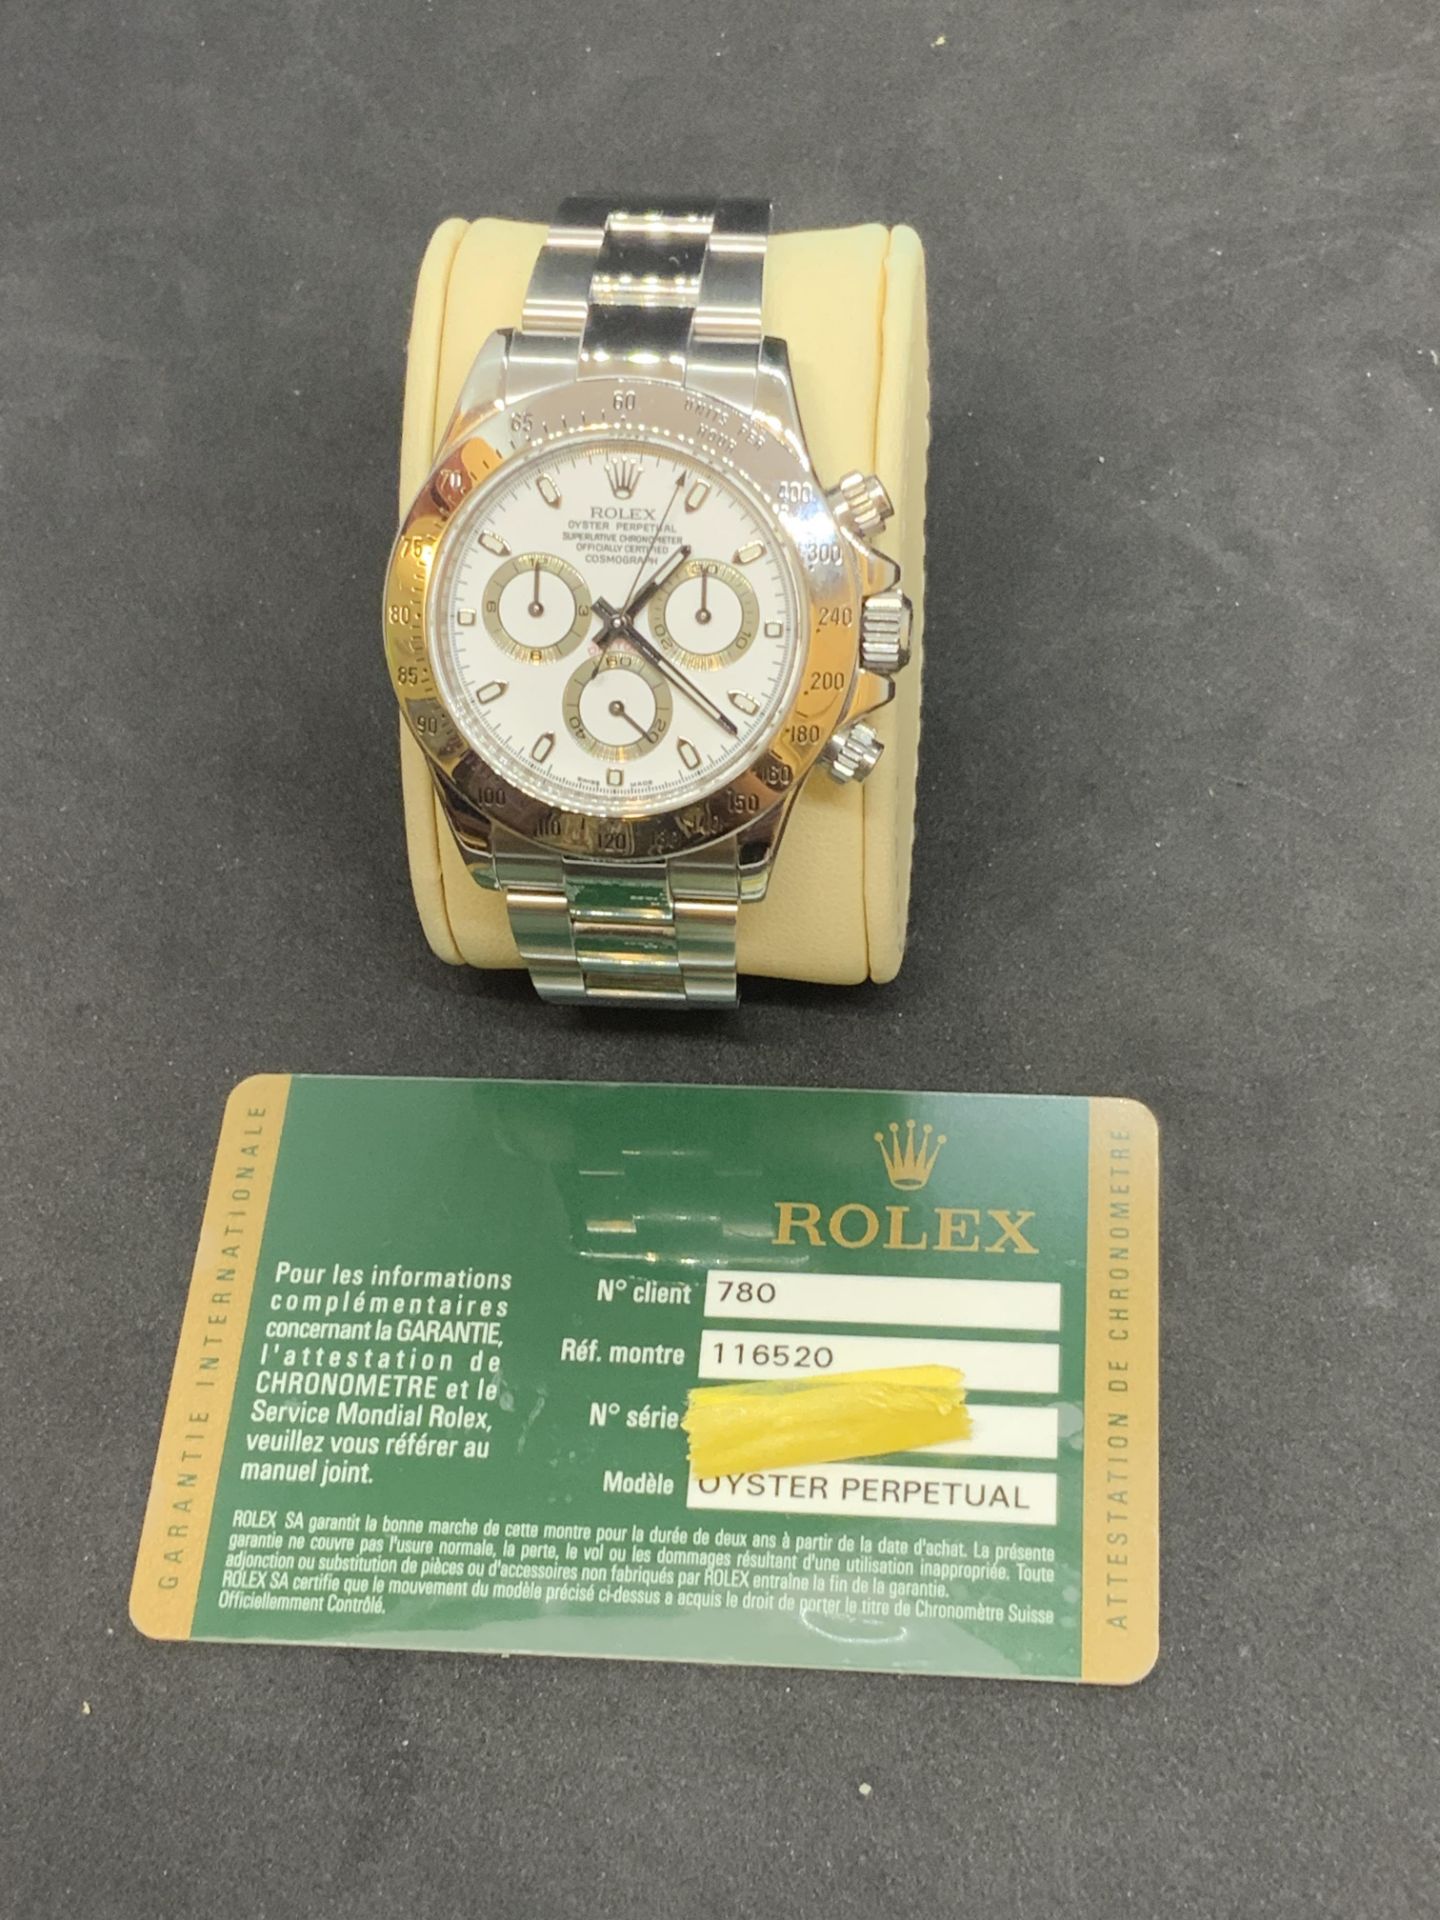 2008 ROLEX DAYTONA S/STEEL WITH ROLEX PAPERS 116520 - WHITE DIAL